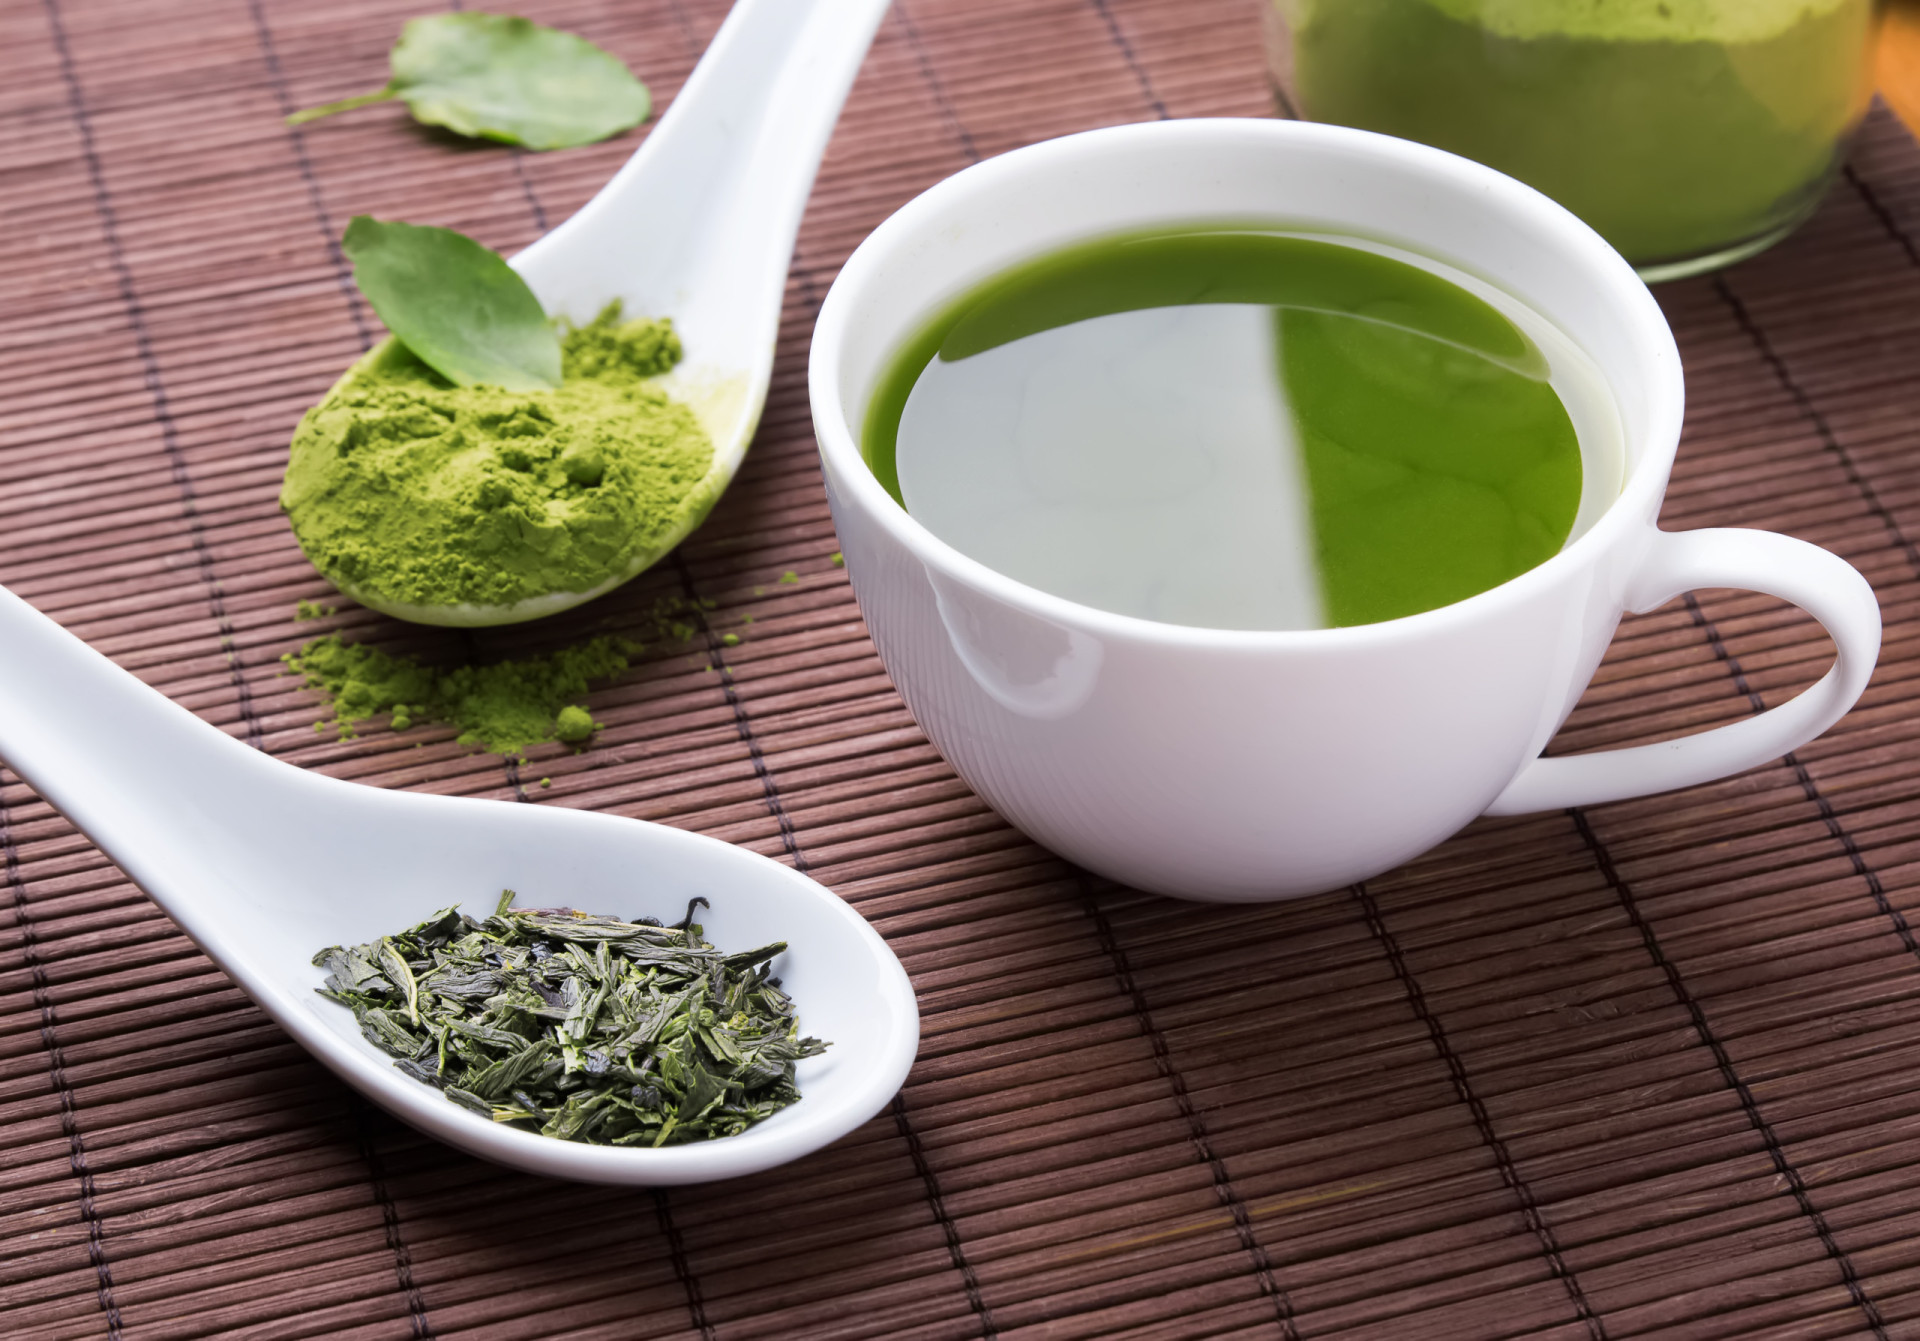 <p>The use of green tea (<em>camellia sinensis</em>) is contraindicated for patients taking isoniazid, as it may affect the liver. It may also reduce the bioavailability of sunitinib, and decrease the effectiveness of ziprasidone.</p><p>You may also like:<a href="https://www.starsinsider.com/n/186189?utm_source=msn.com&utm_medium=display&utm_campaign=referral_description&utm_content=556697en-en"> The theories behind the ever-mysterious death of Edgar Allan Poe</a></p>